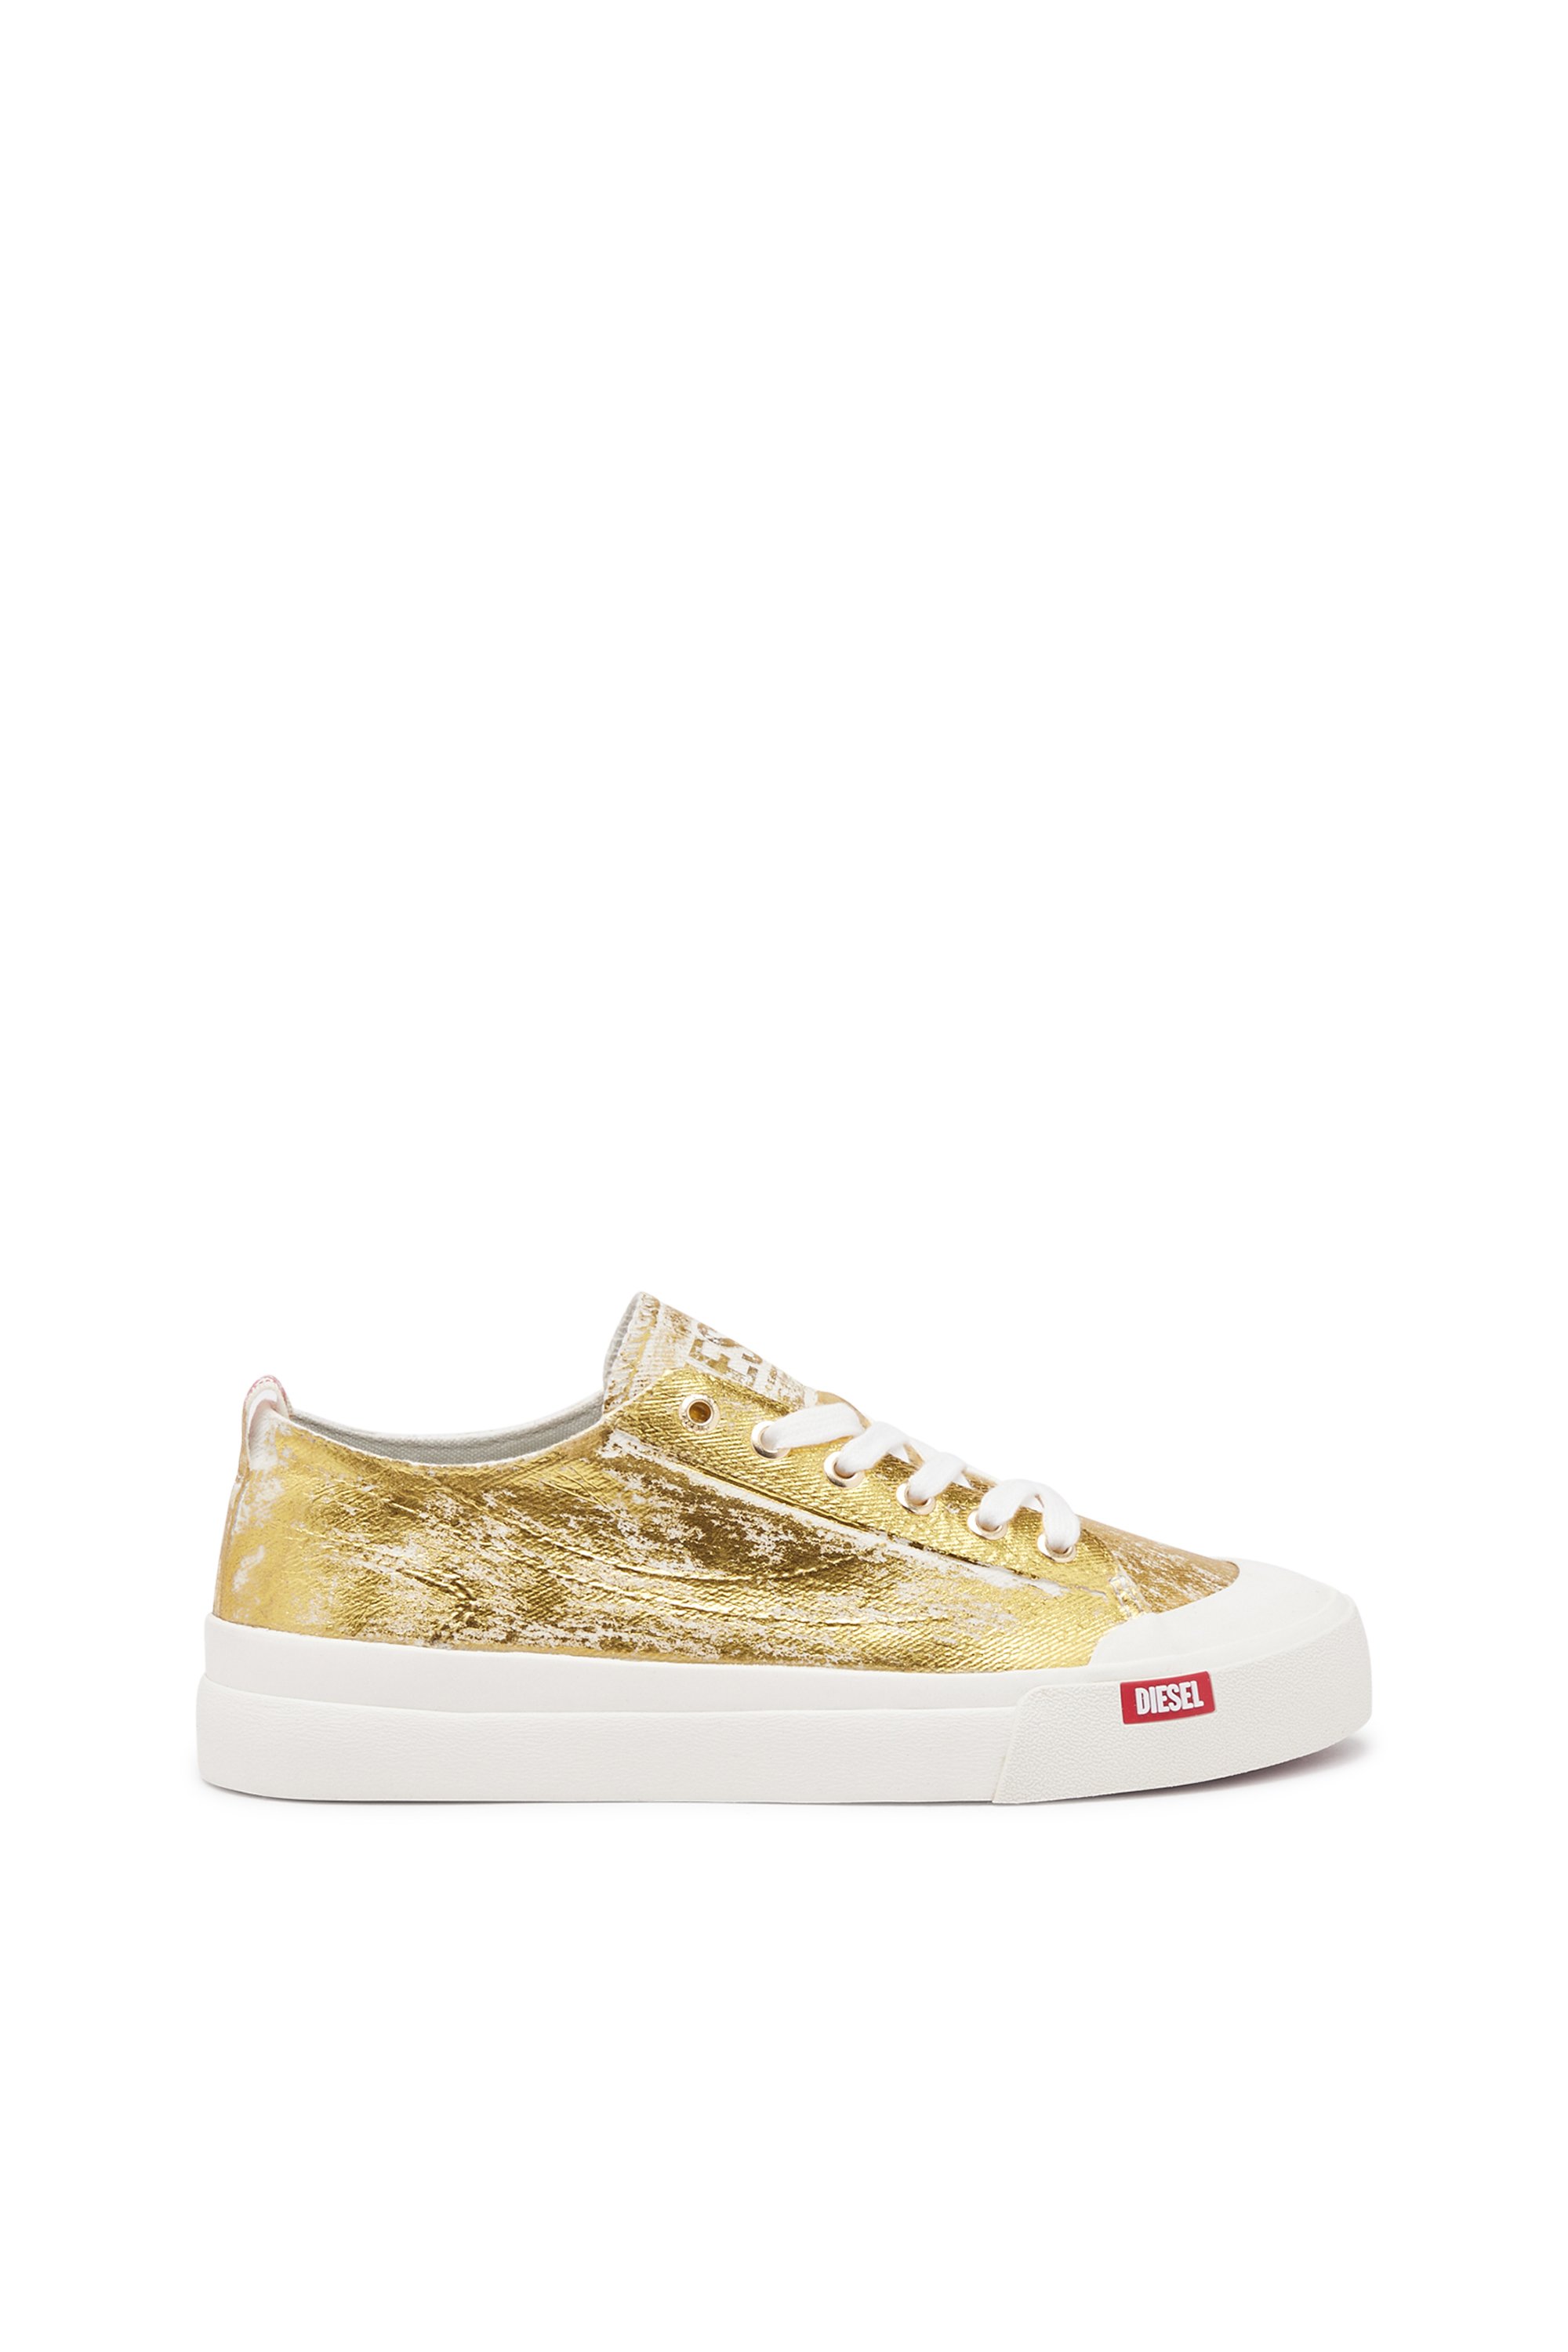 Diesel - S-Athos Low-Sneaker in canvas metallizzato distressed - Sneakers - Donna - Oro